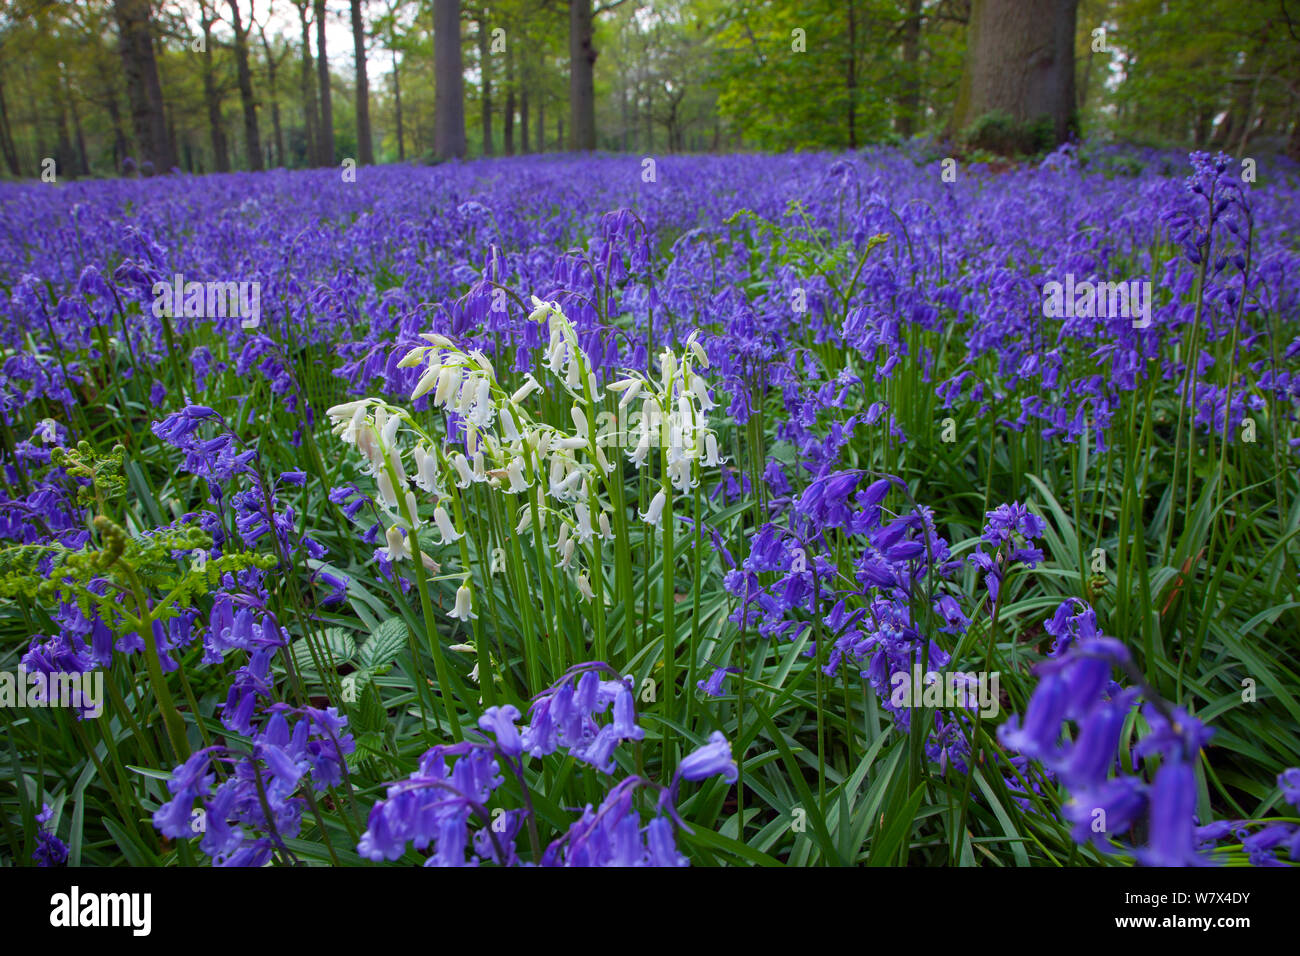 Bluebells (Hyacinthoides non-scripta) growing in woodland. Blickling Great Wood, UK, April. Stock Photo